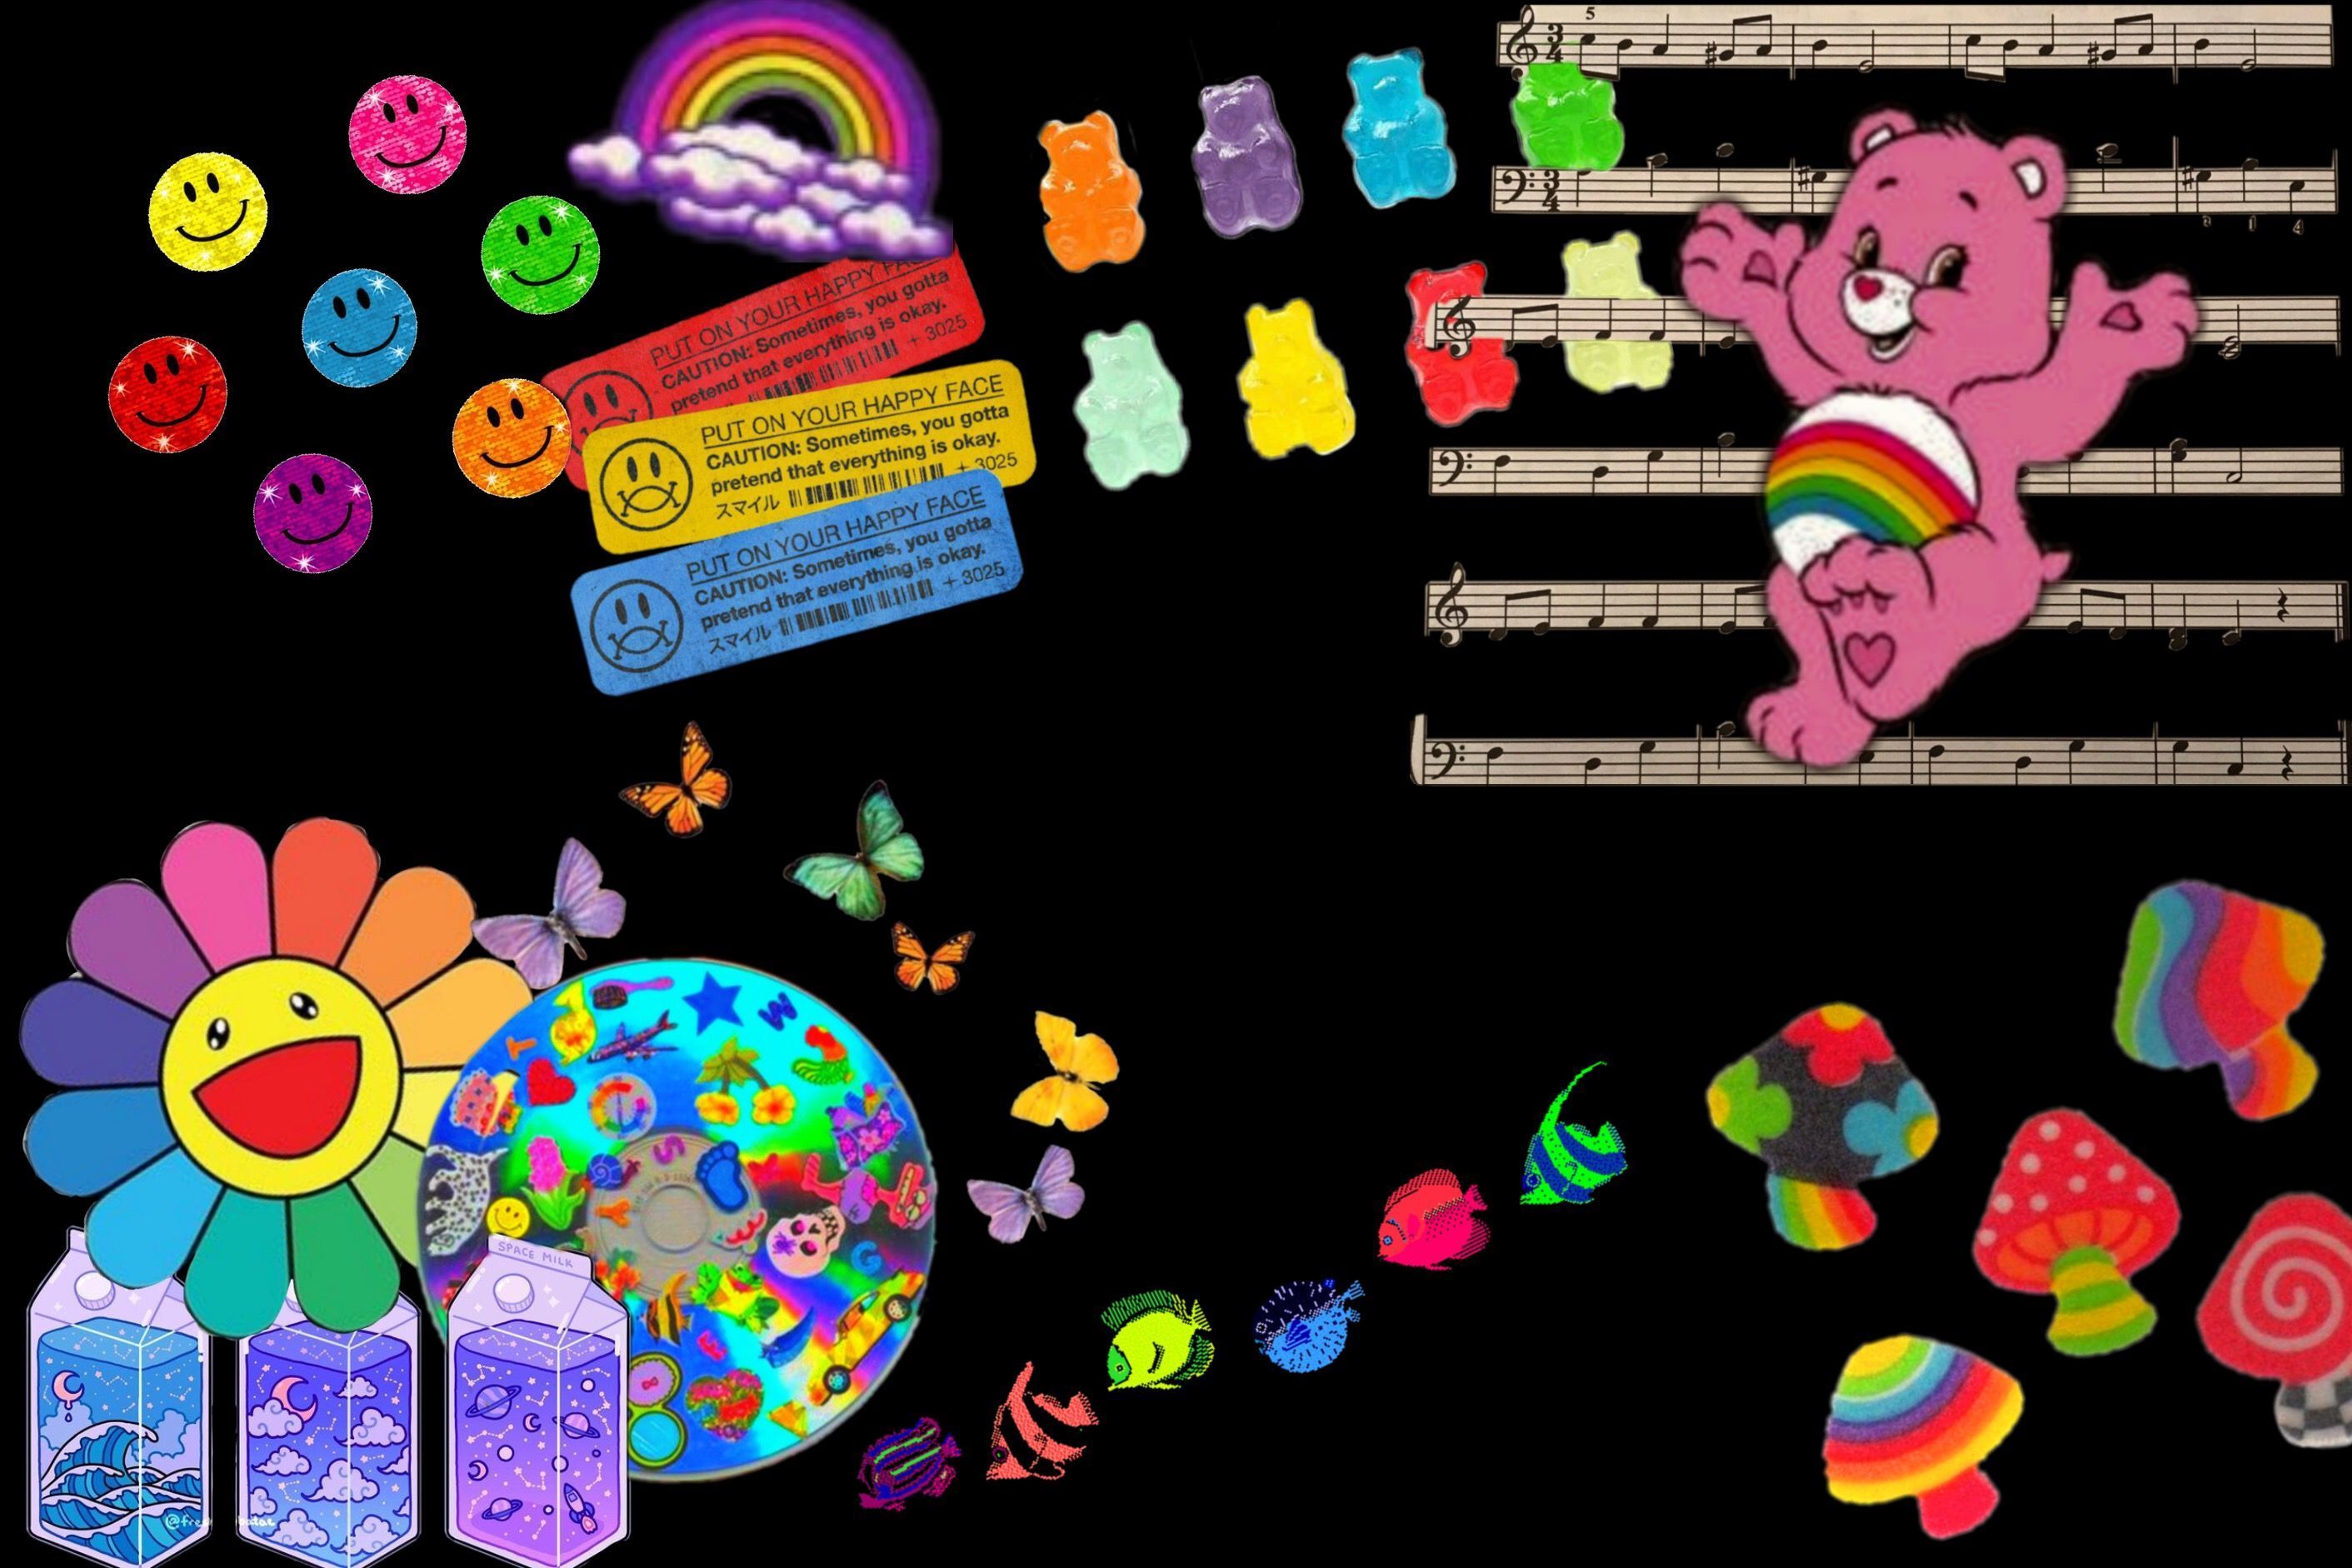 A collage of images including Care Bears, butterflies, music notes, and a CD. - Indie